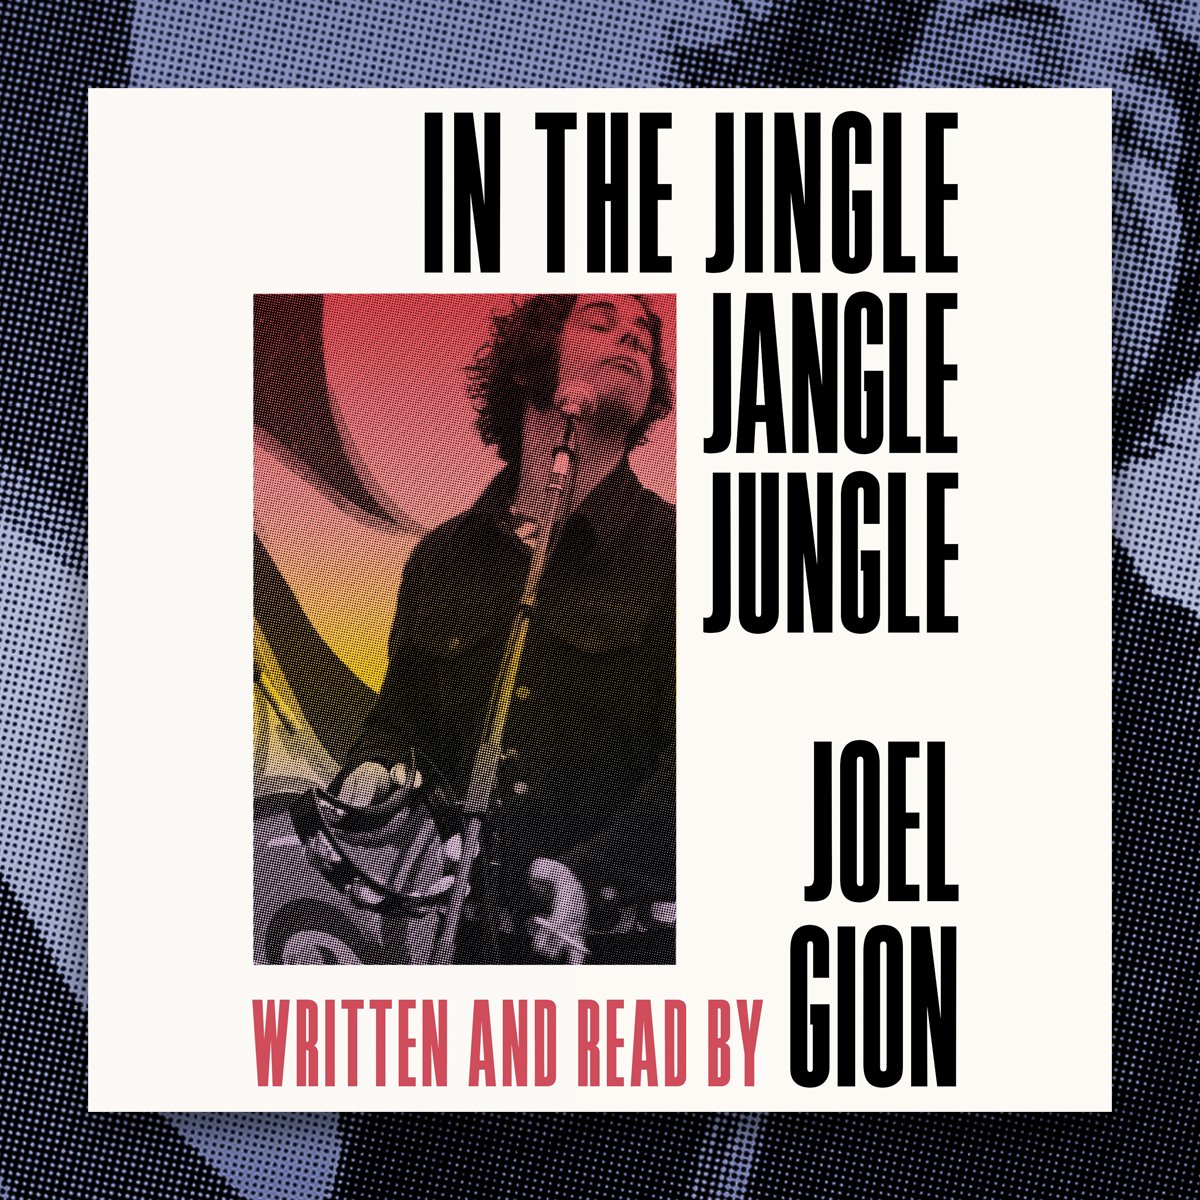 A reminder you can have the man himself @realjoelgion narrate his memoir to you in audiobook - and if you saw him on his recent book tour, you'll know how entertaining it will be... On Audible audible.co.uk/pd/In-the-Jing… Or Spotify (included in Premium) open.spotify.com/show/4rphWCpZn…